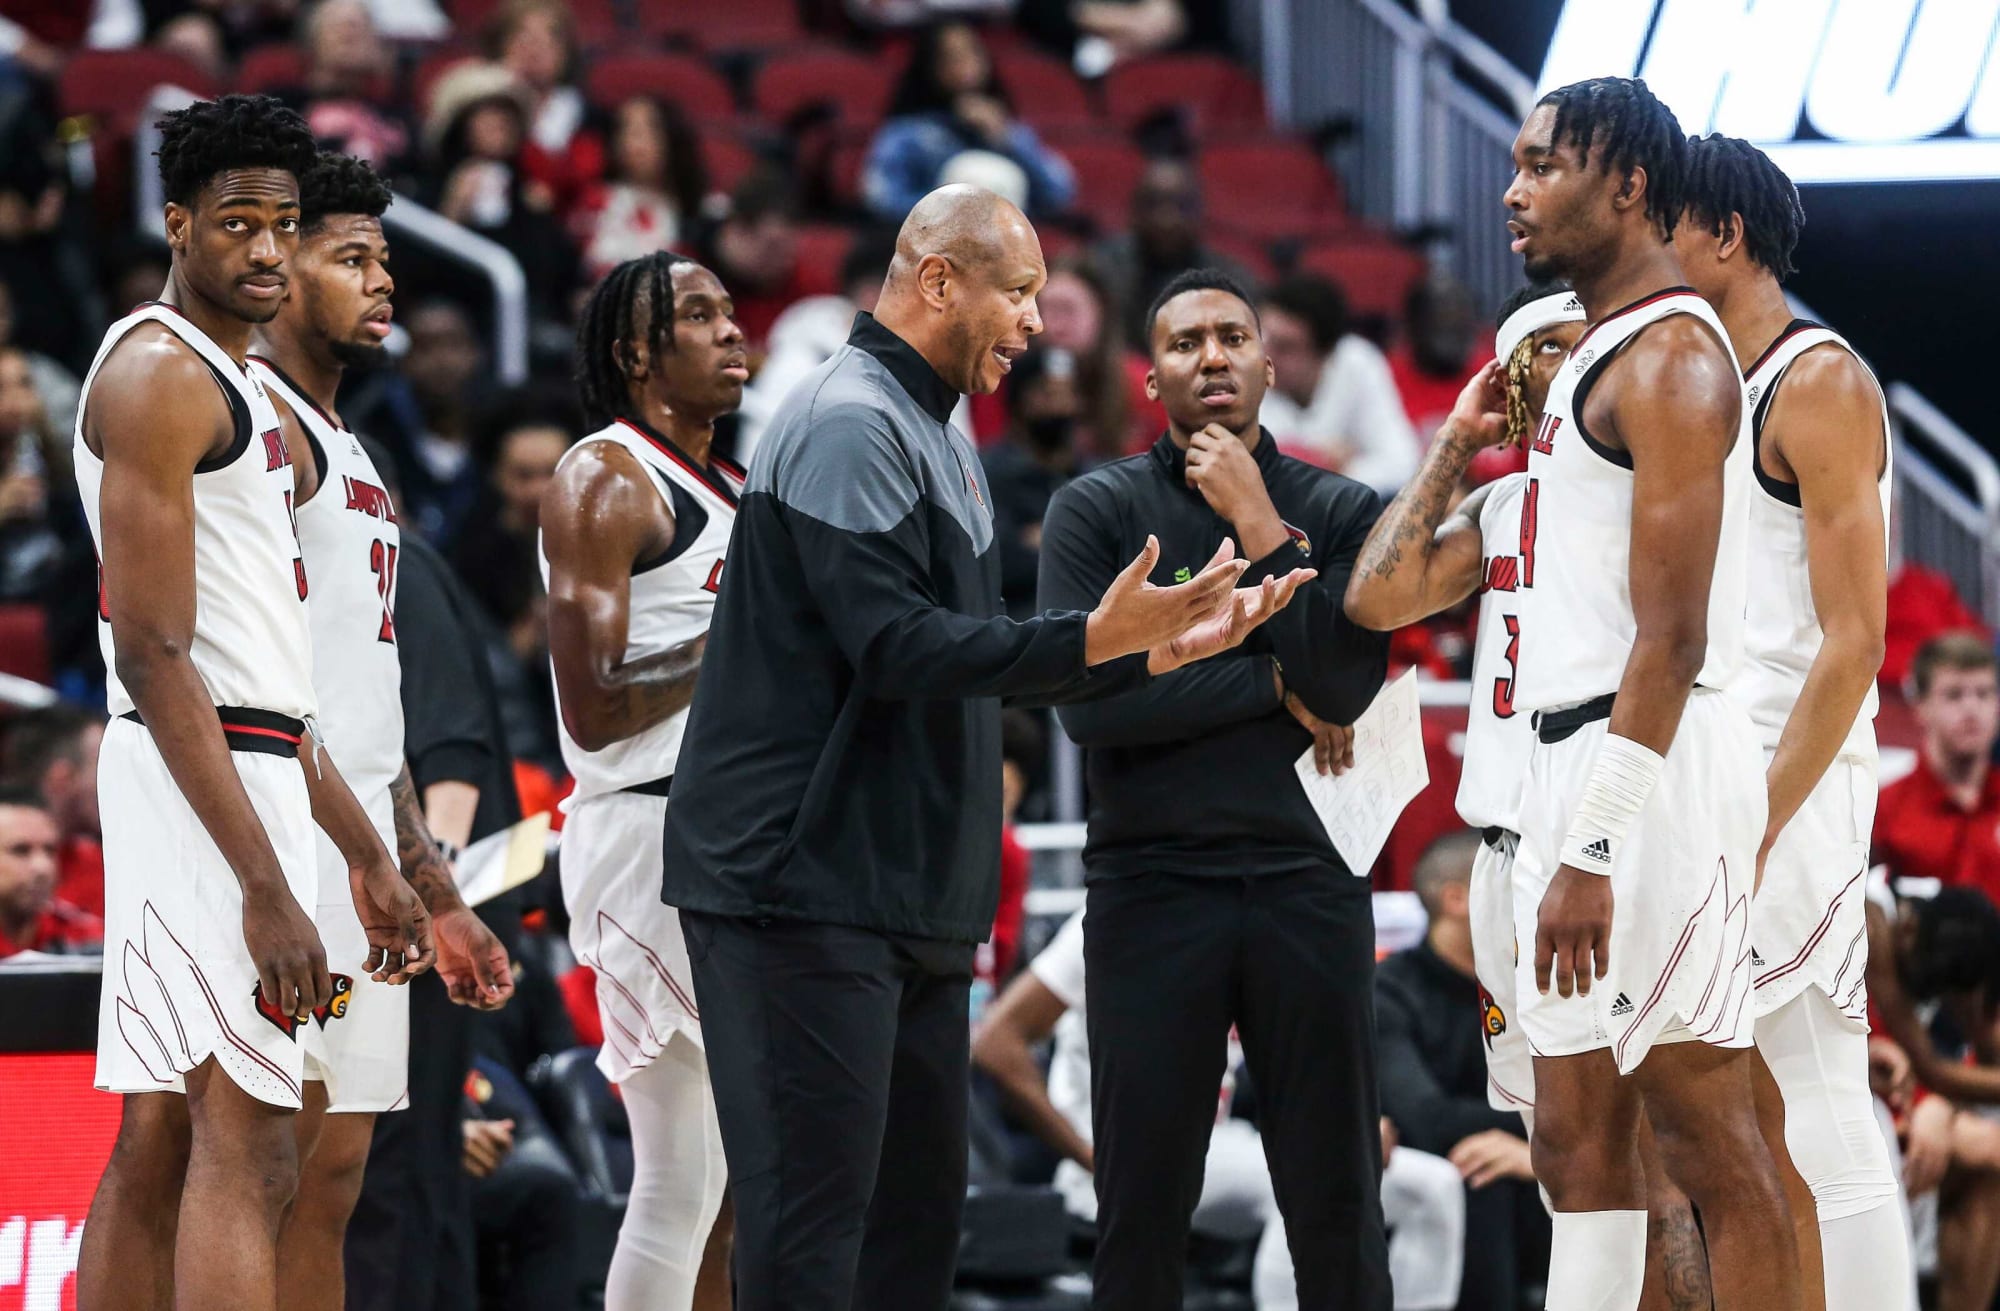 Louisville basketball Comparing 20222023 team to 20232024 team (on